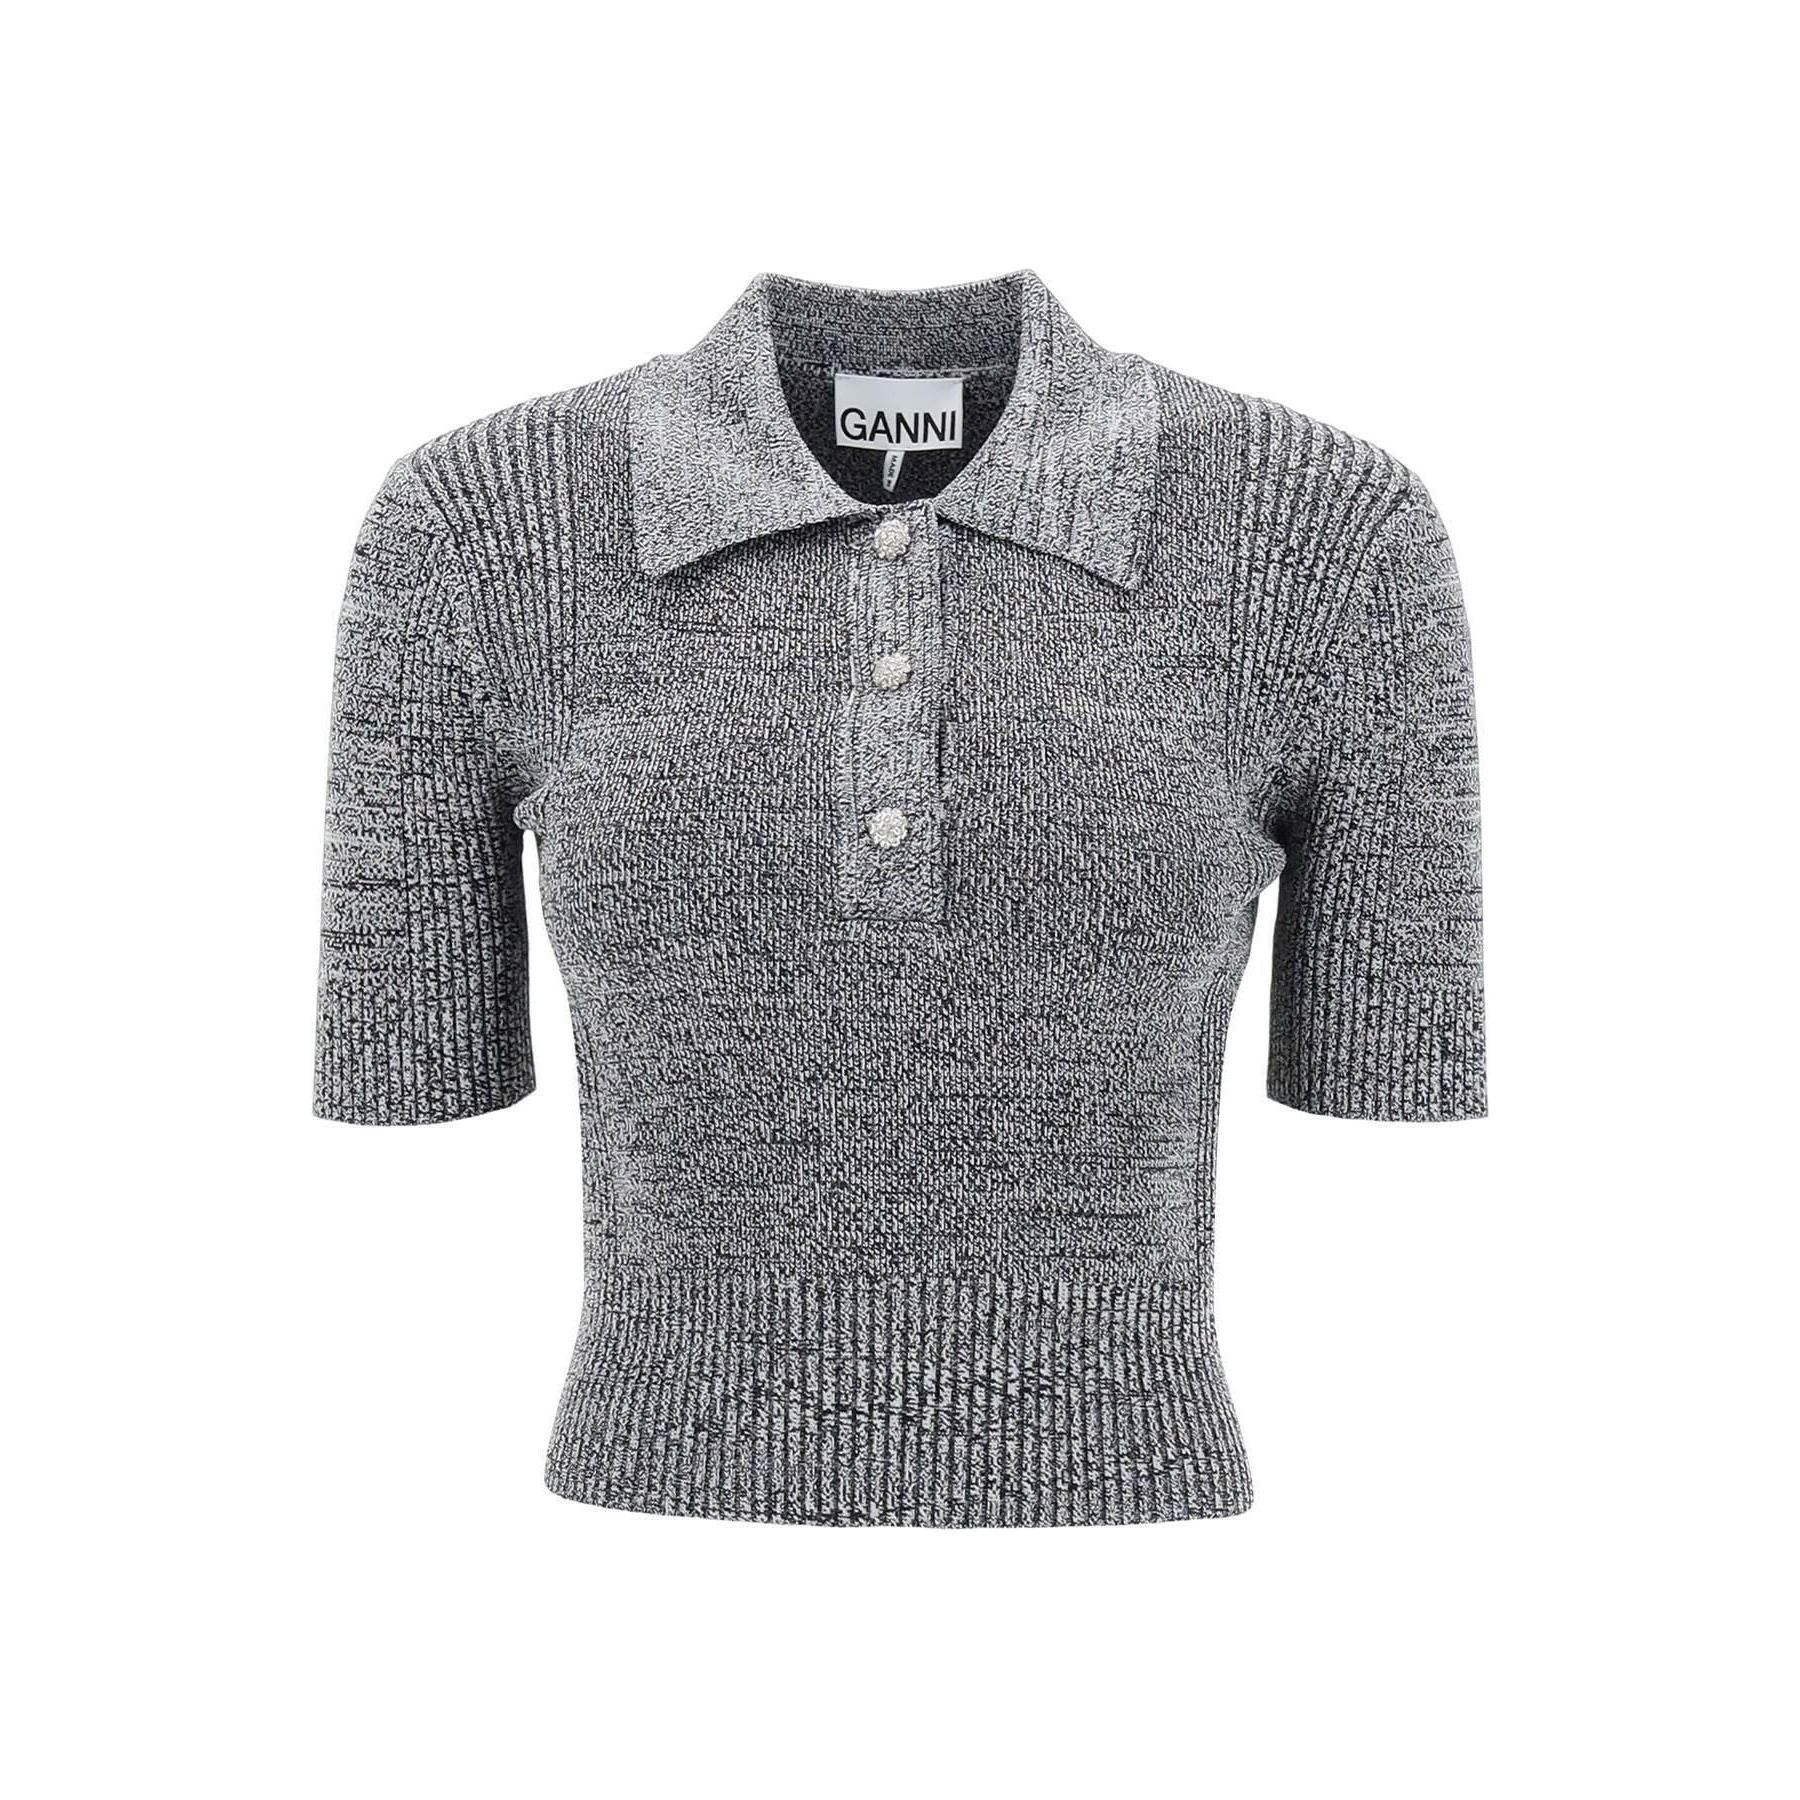 Stretch Knit Polo Top With Jewel Buttons GANNI JOHN JULIA.